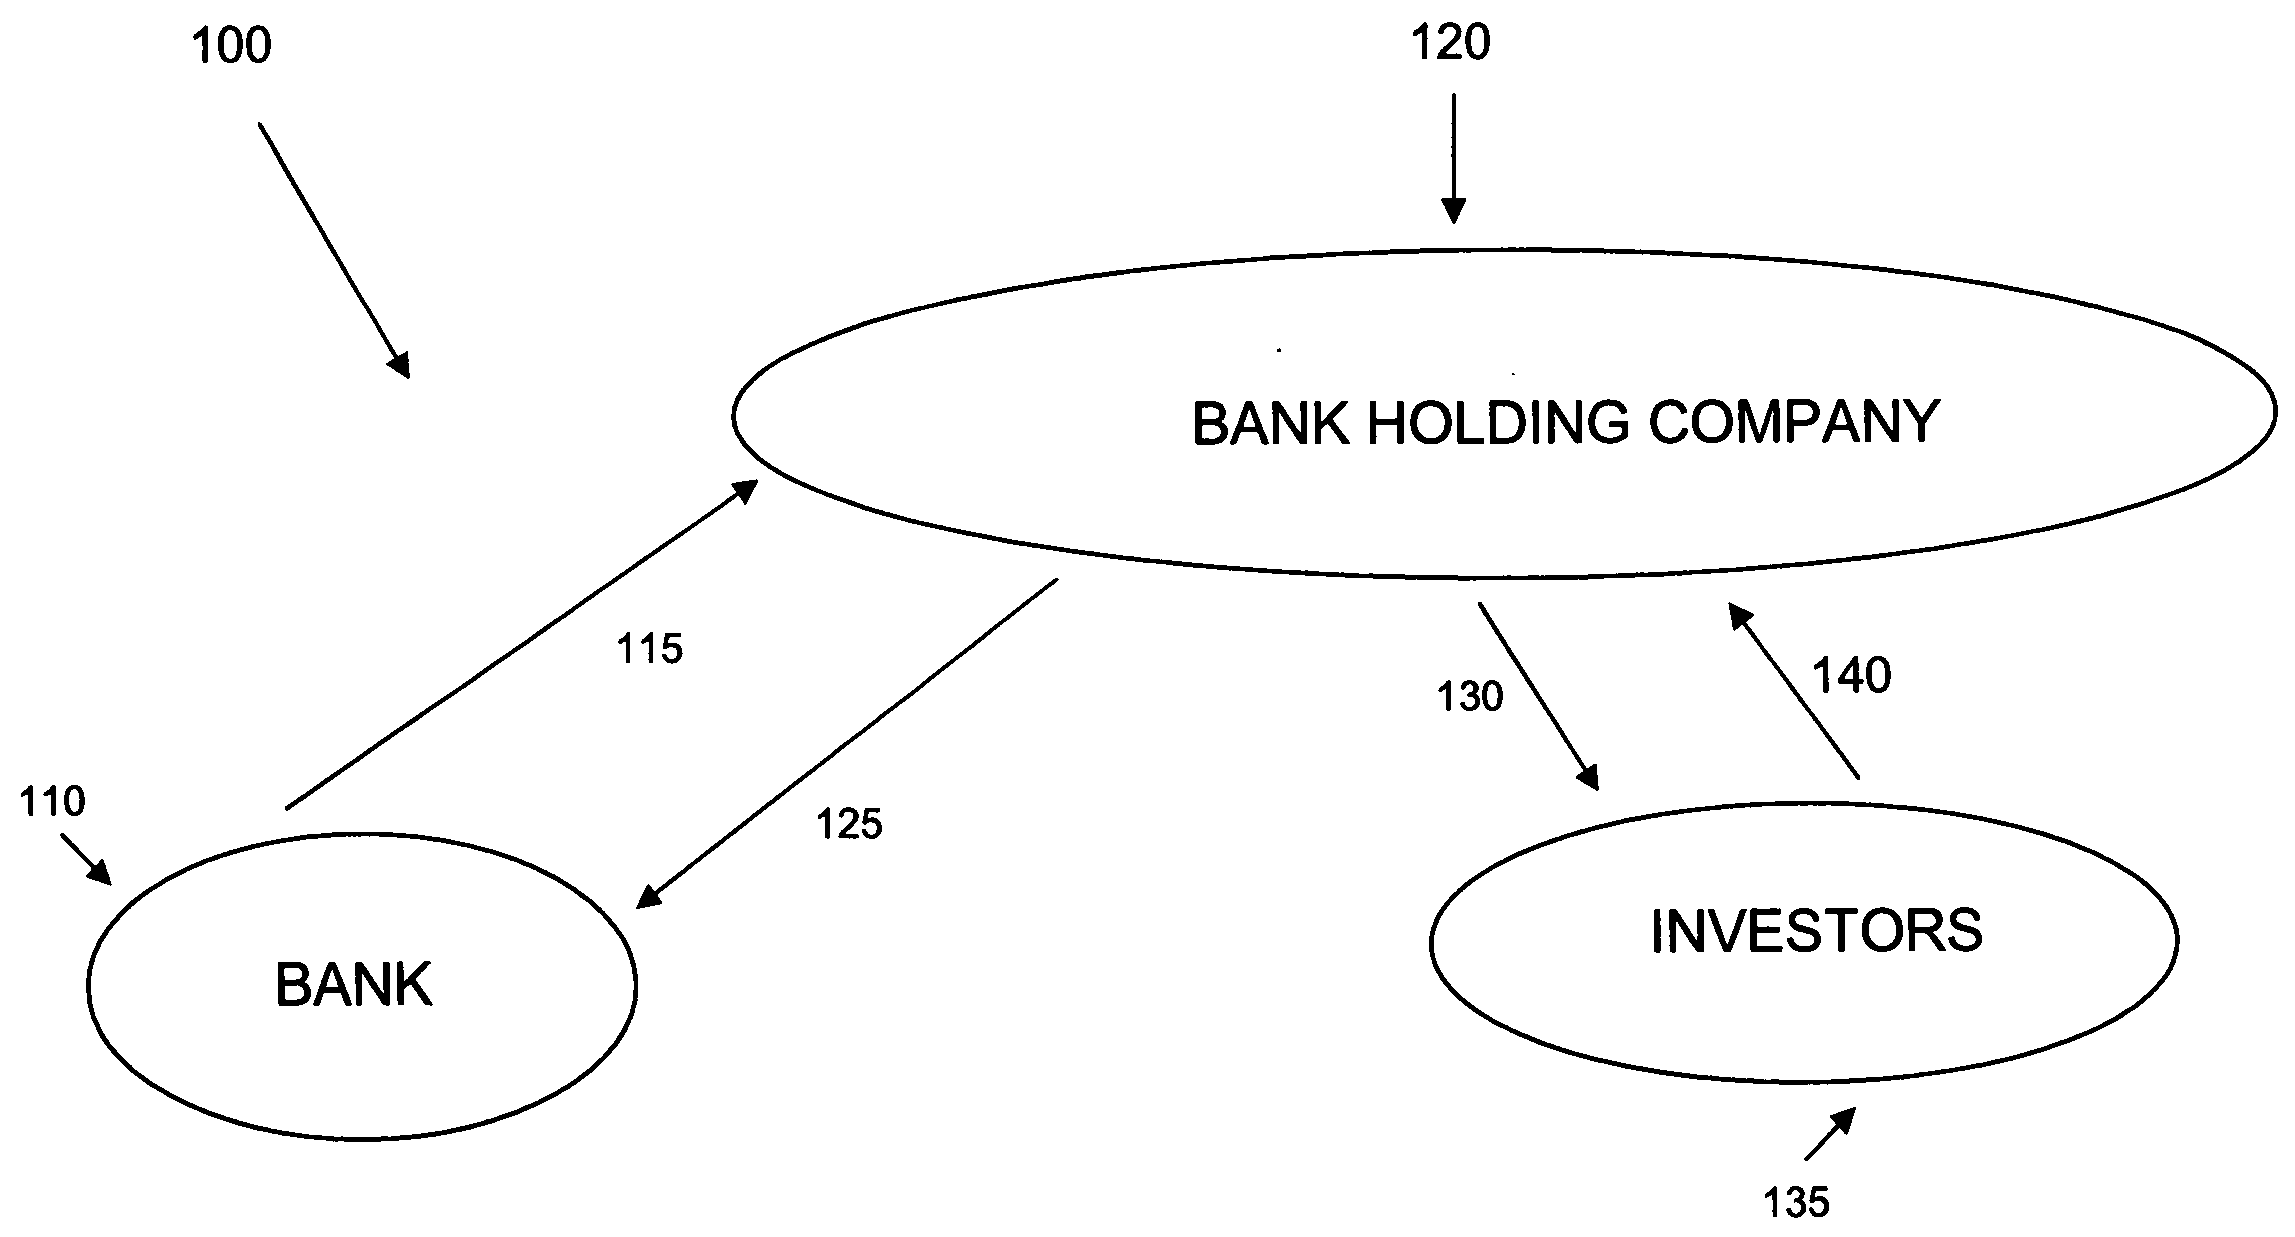 Method of capitalizing a bank or bank holding company